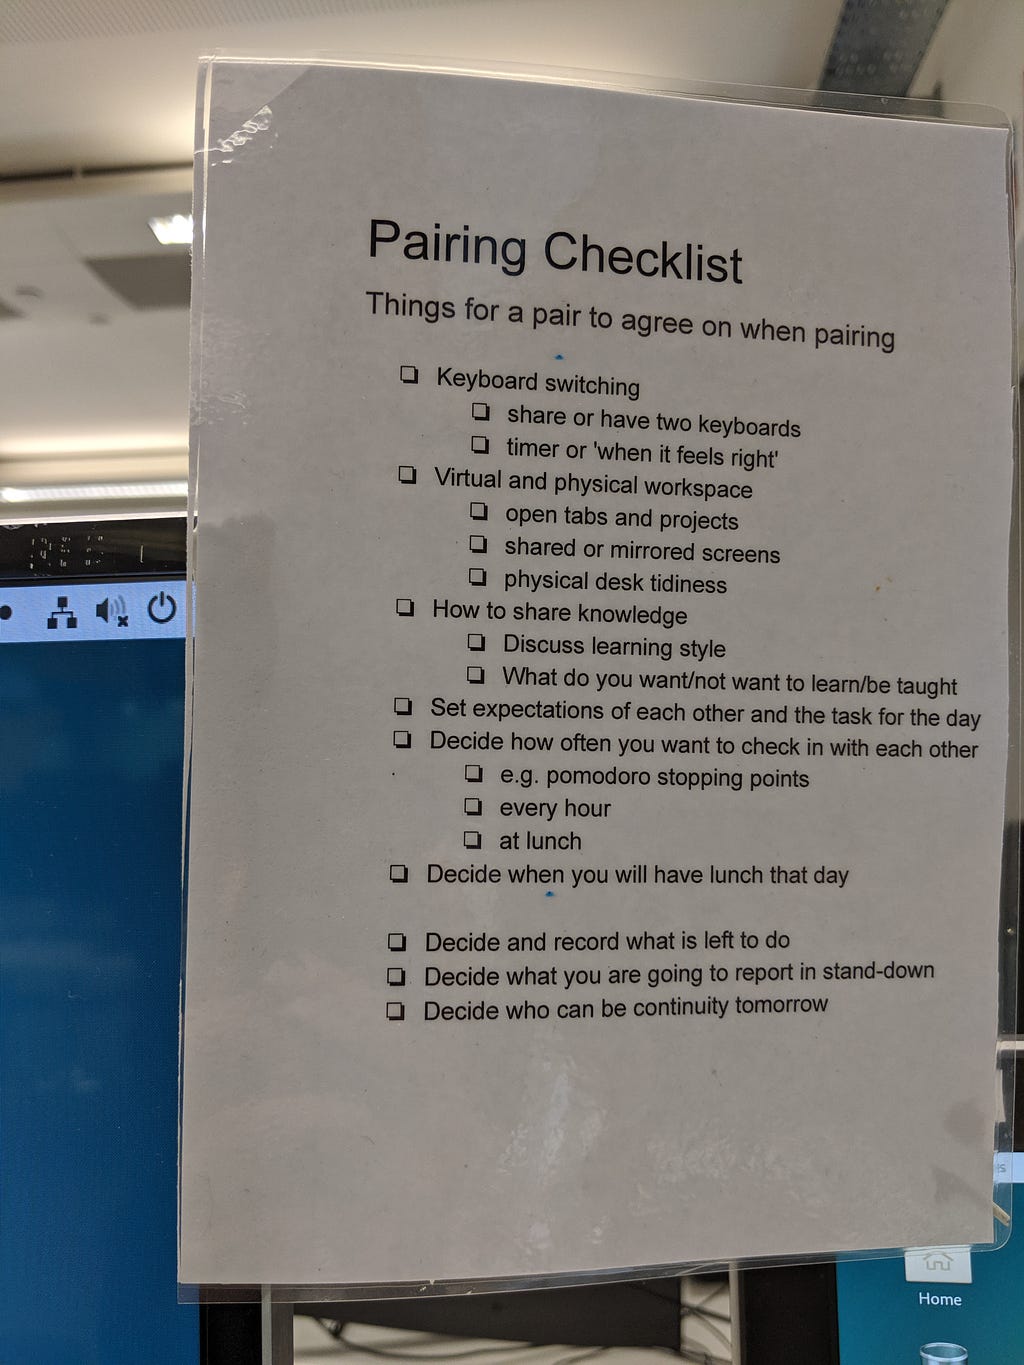 Pairing checklist attached to screen: e.g. Set expectations of each other and the task for the day